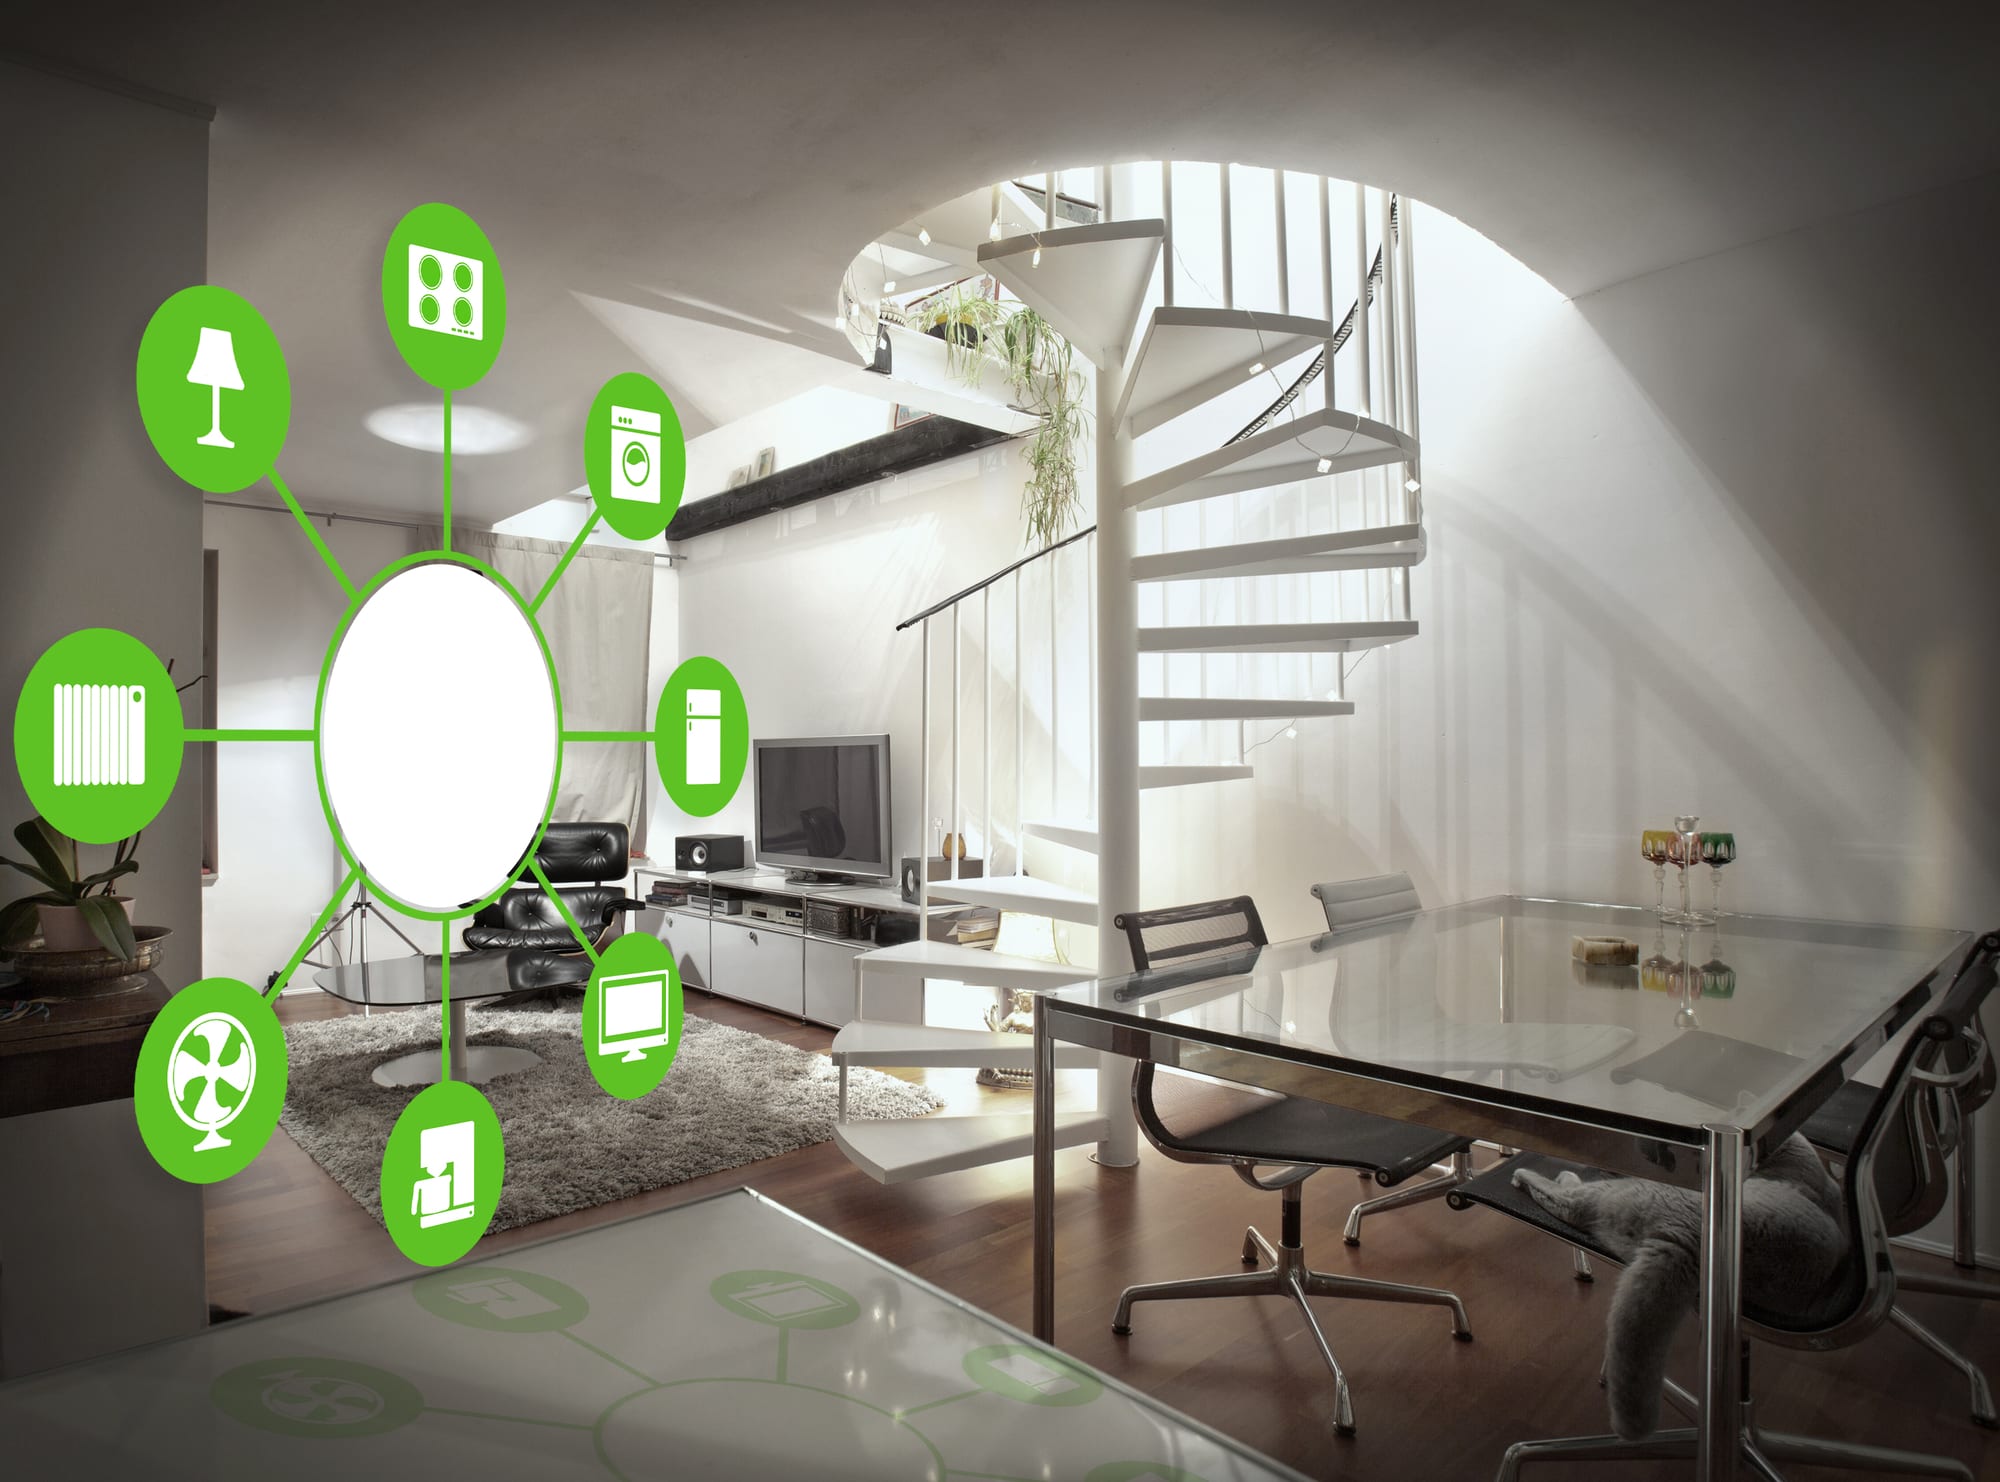 Depiction of a home smart app. Tech gadgets for your home can make your life easier.